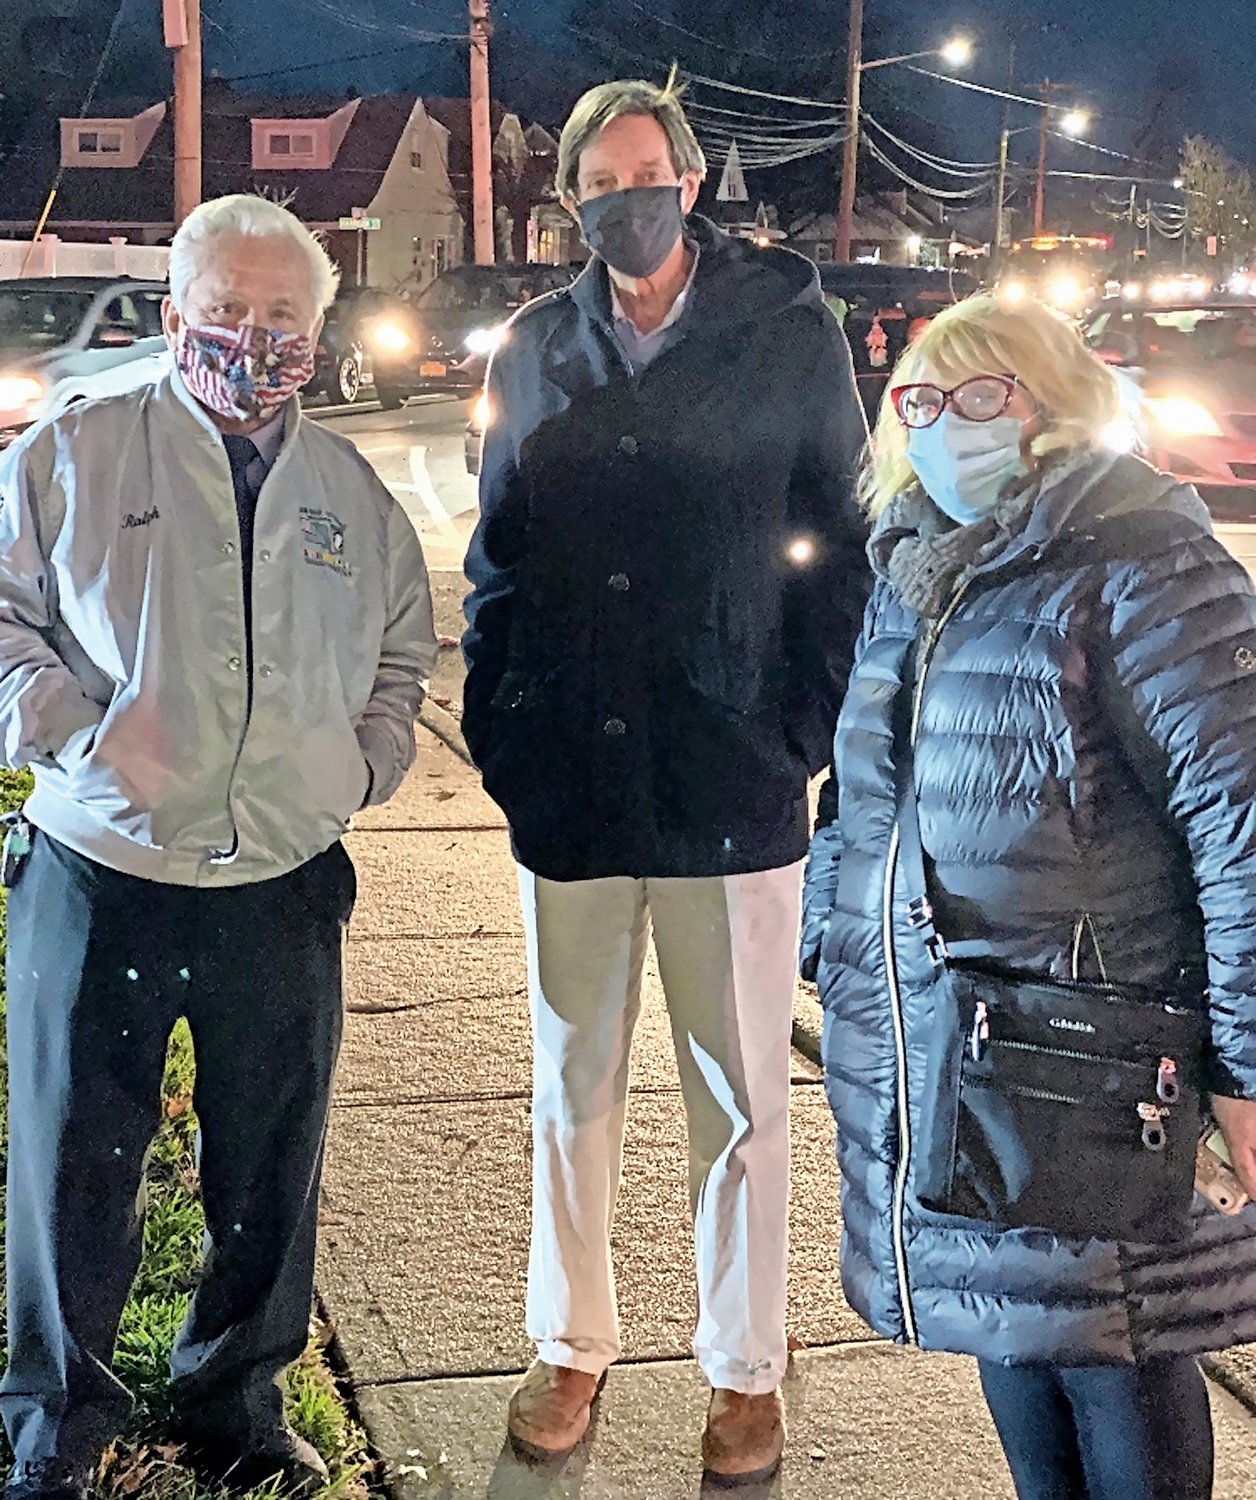 Julie Marchesella, right, has helped run the Elmont Chamber of Commerce’s annual Christmas tree lighting ceremony over her 25 years as a chamber member. She was with board members Ralph Esposito and Pat Boyle at the ceremony in December.